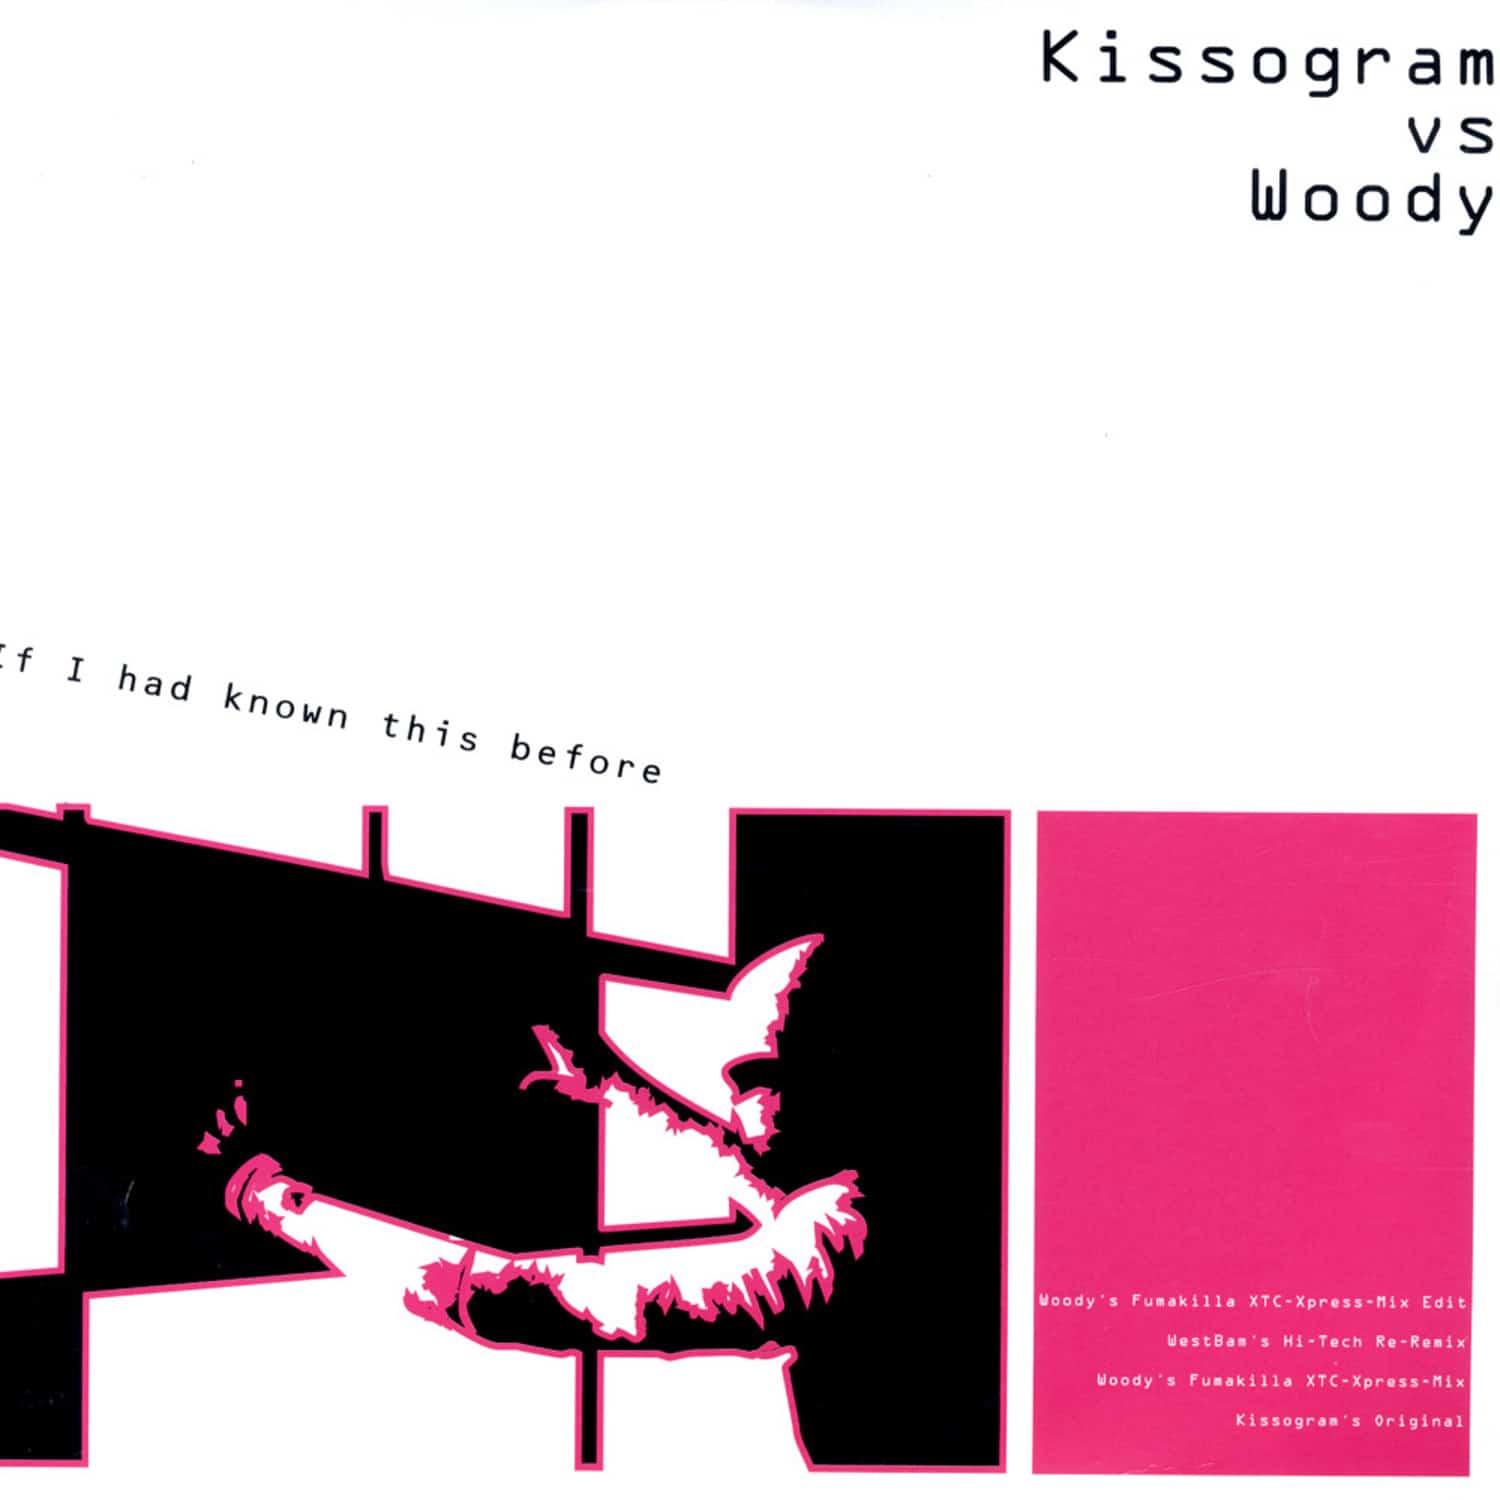 Kissogram vs Woody - IF I HAD KNOWN THIS BEFORE 